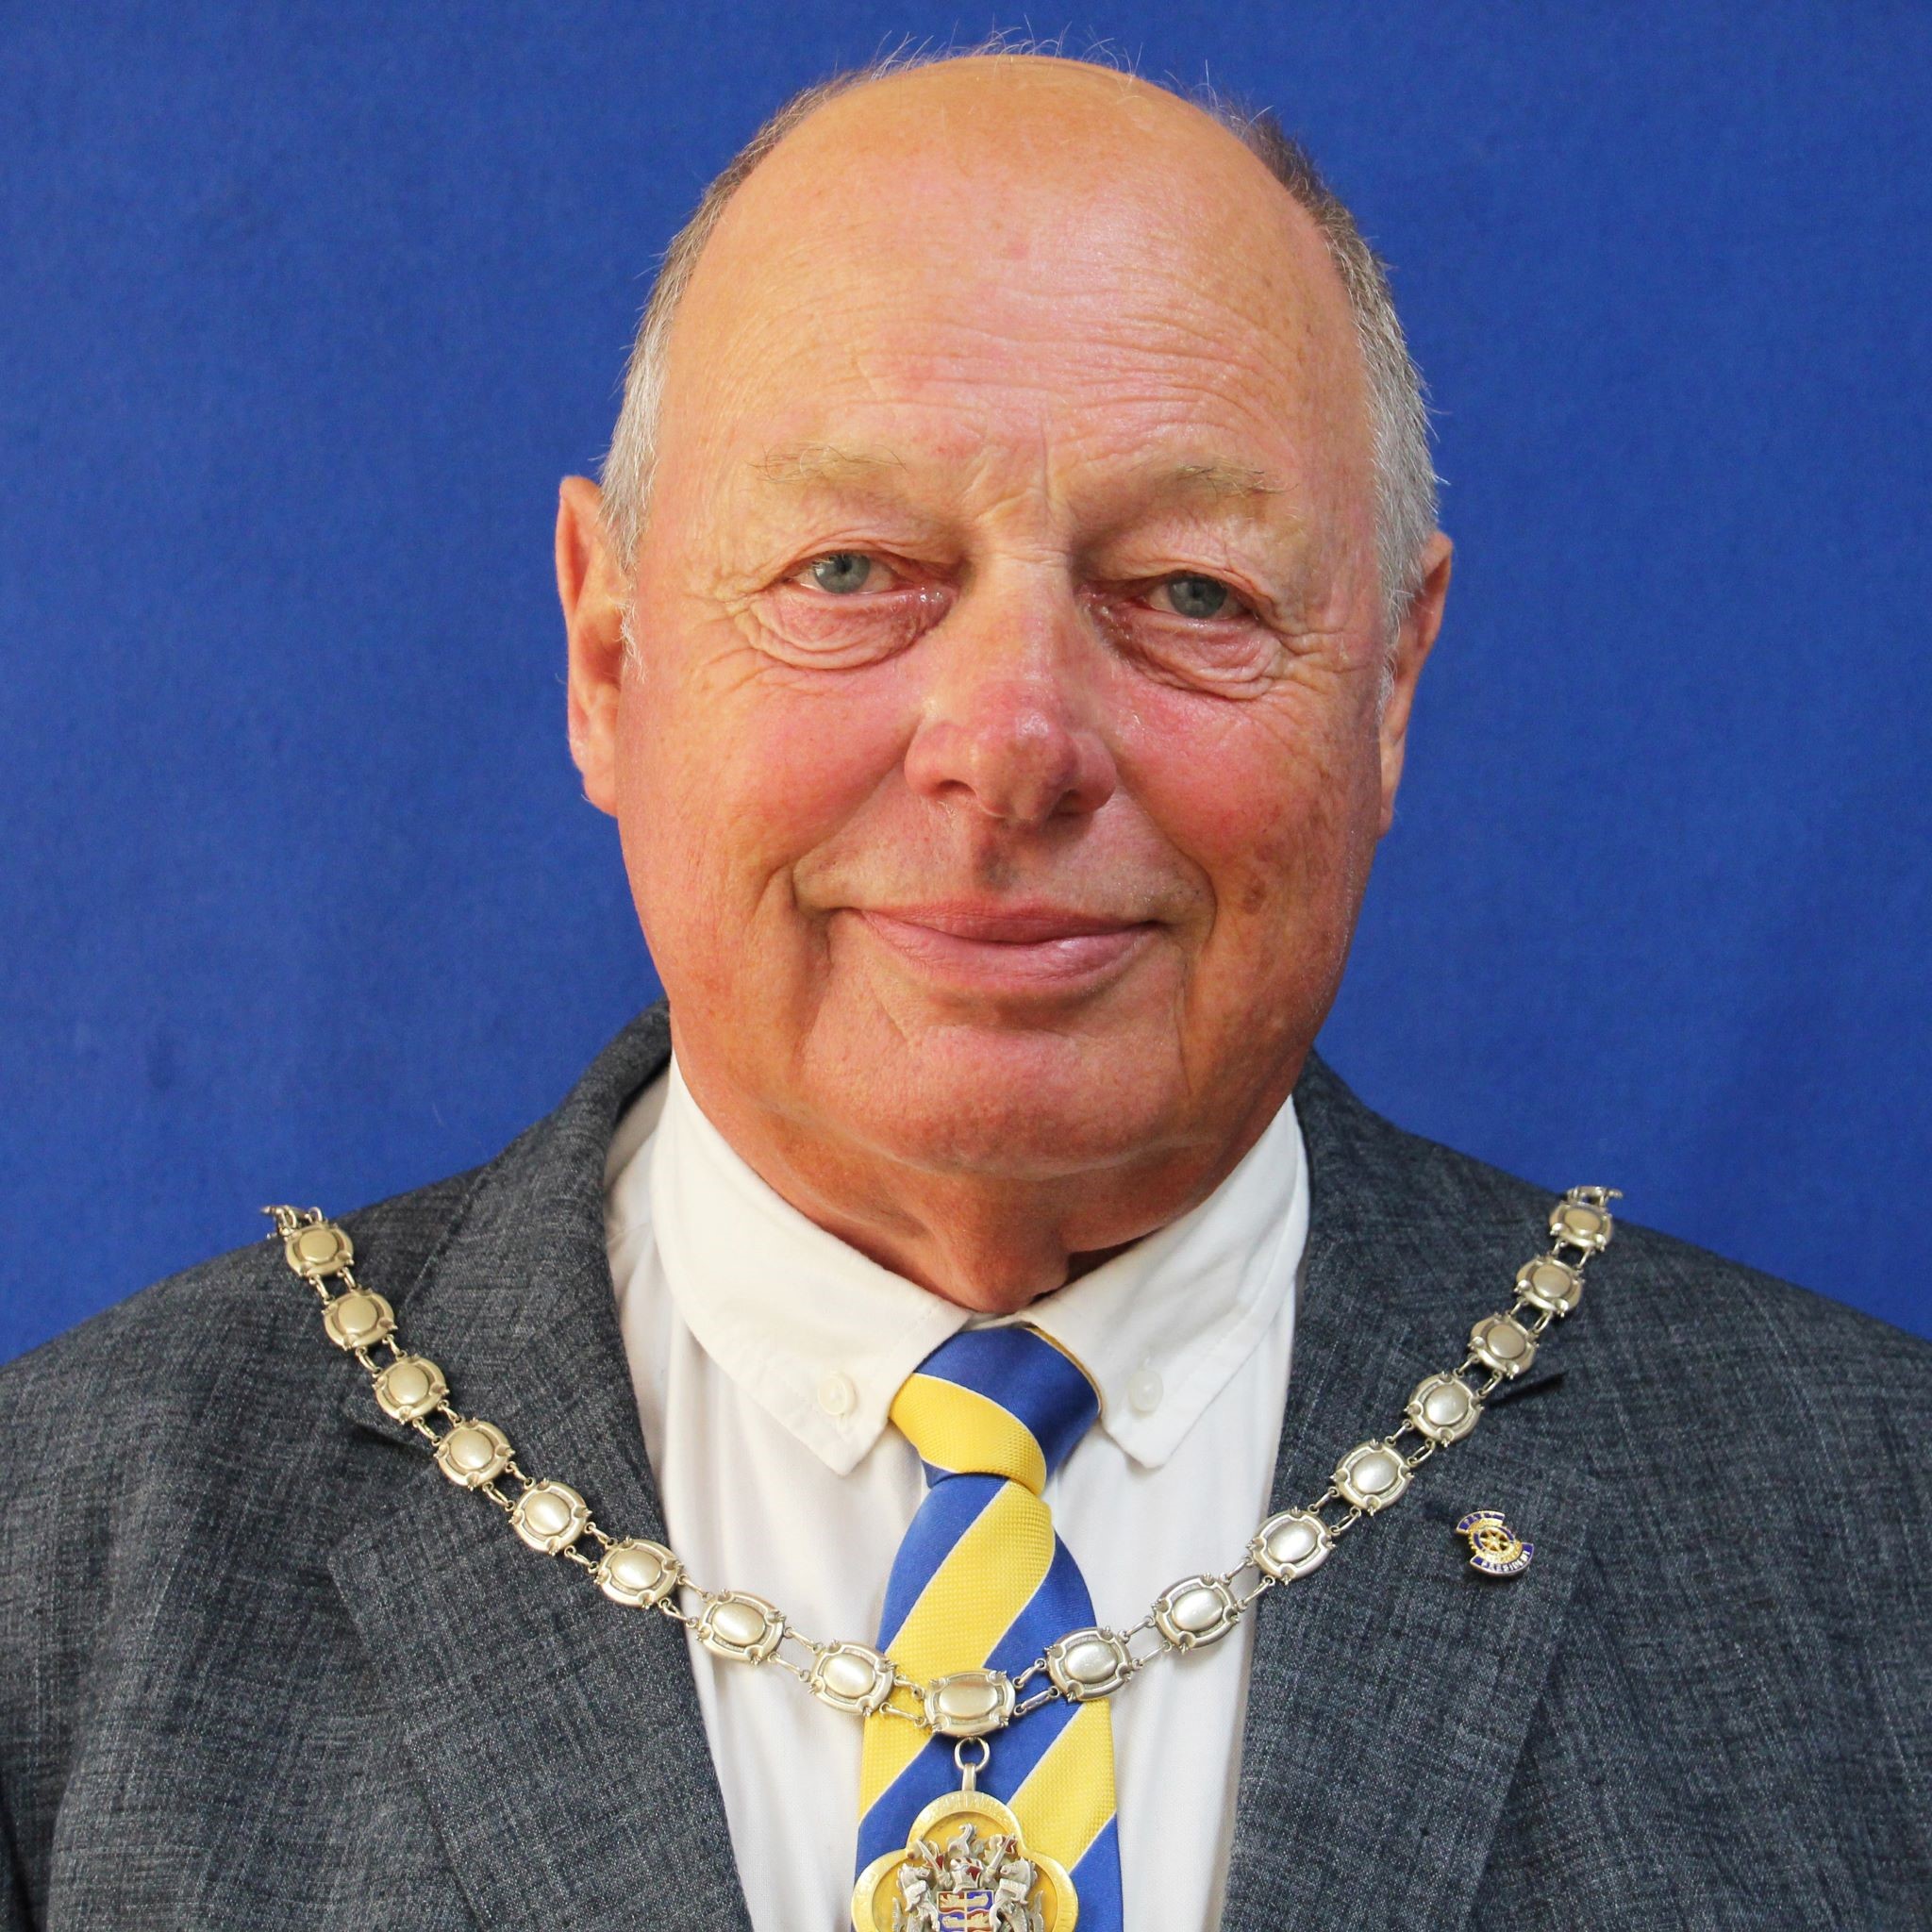 Cllr Hannent, D 2019 July - square - Copy